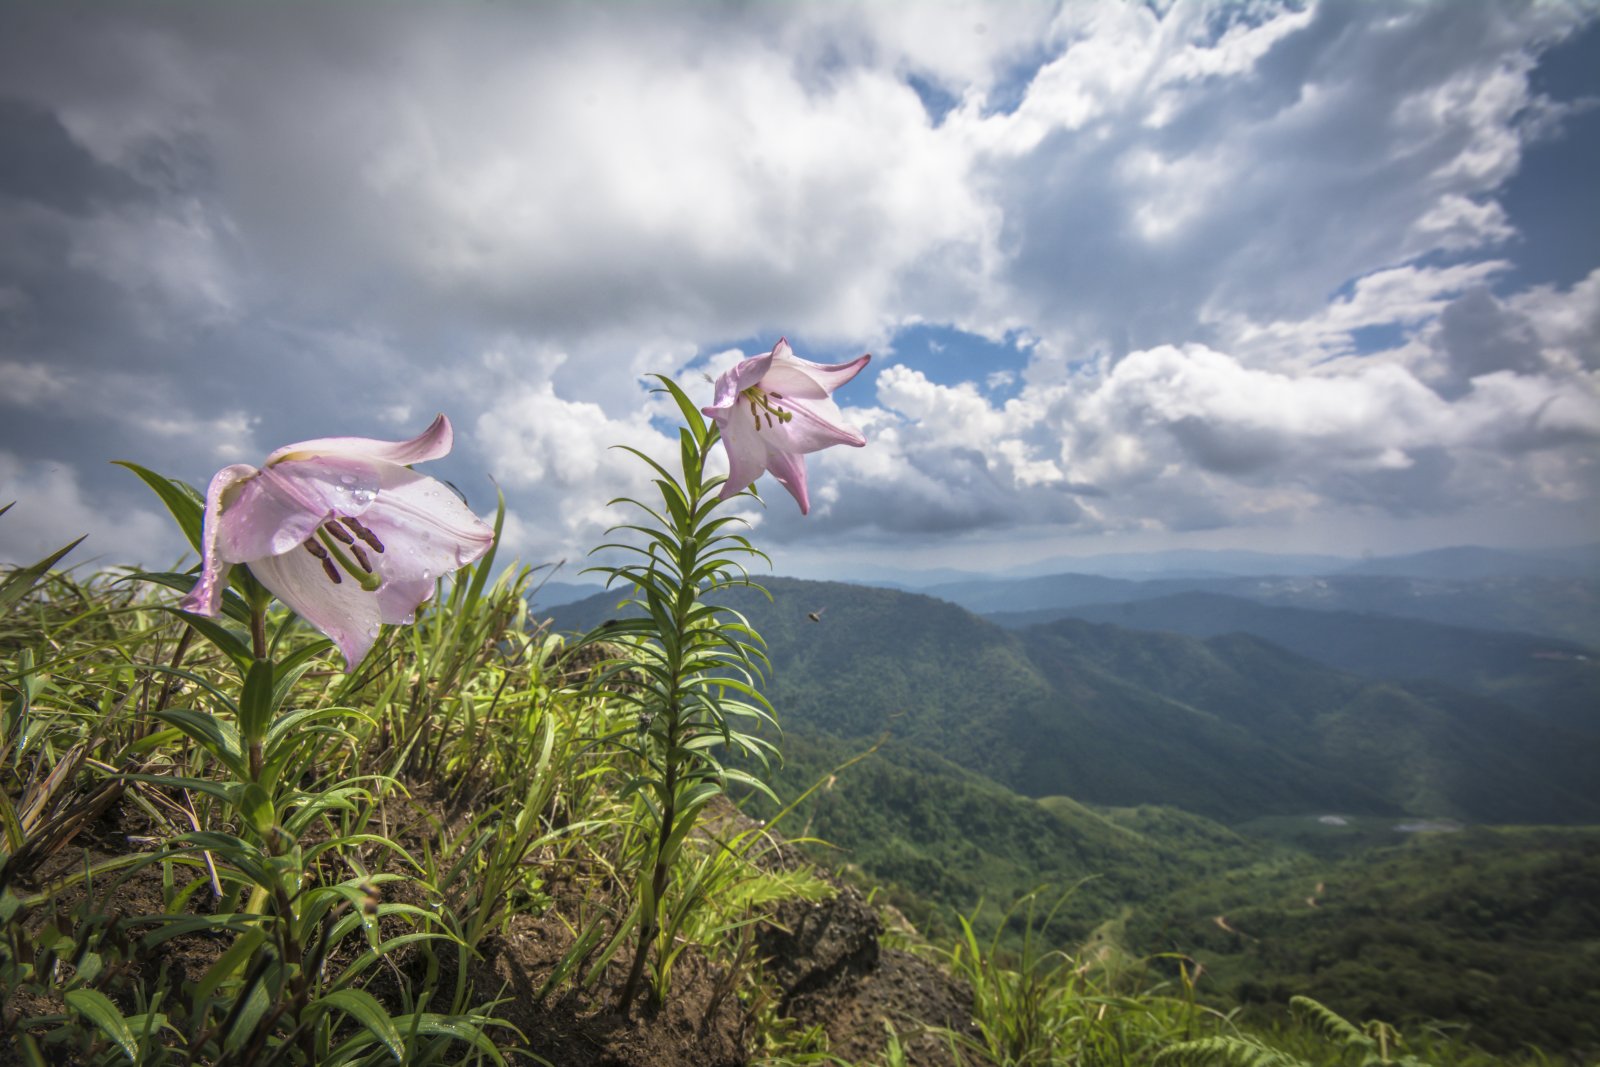 Shirui Lily, the state flower of Manipur, a state in the north-east region of India. Picture courtesy Priyojik Akoijam